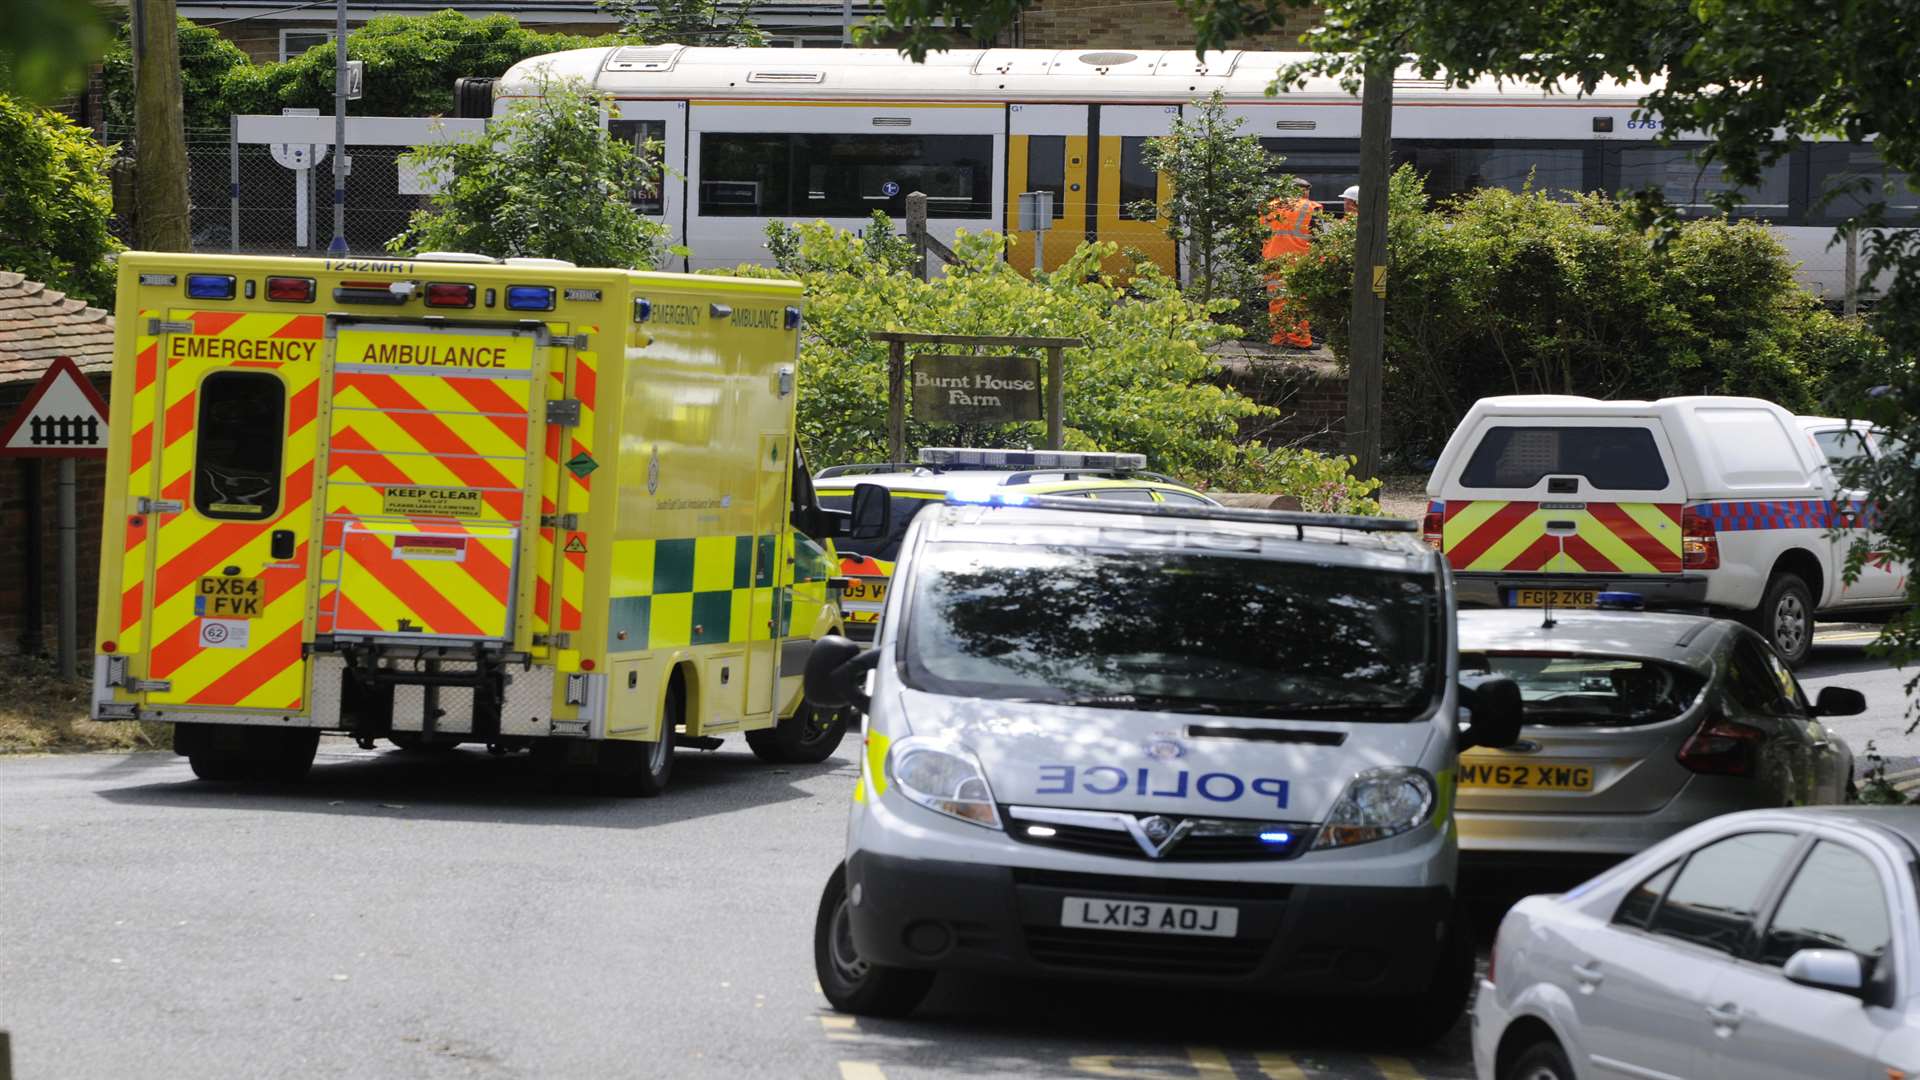 Emergency services at Chartham Railway Station